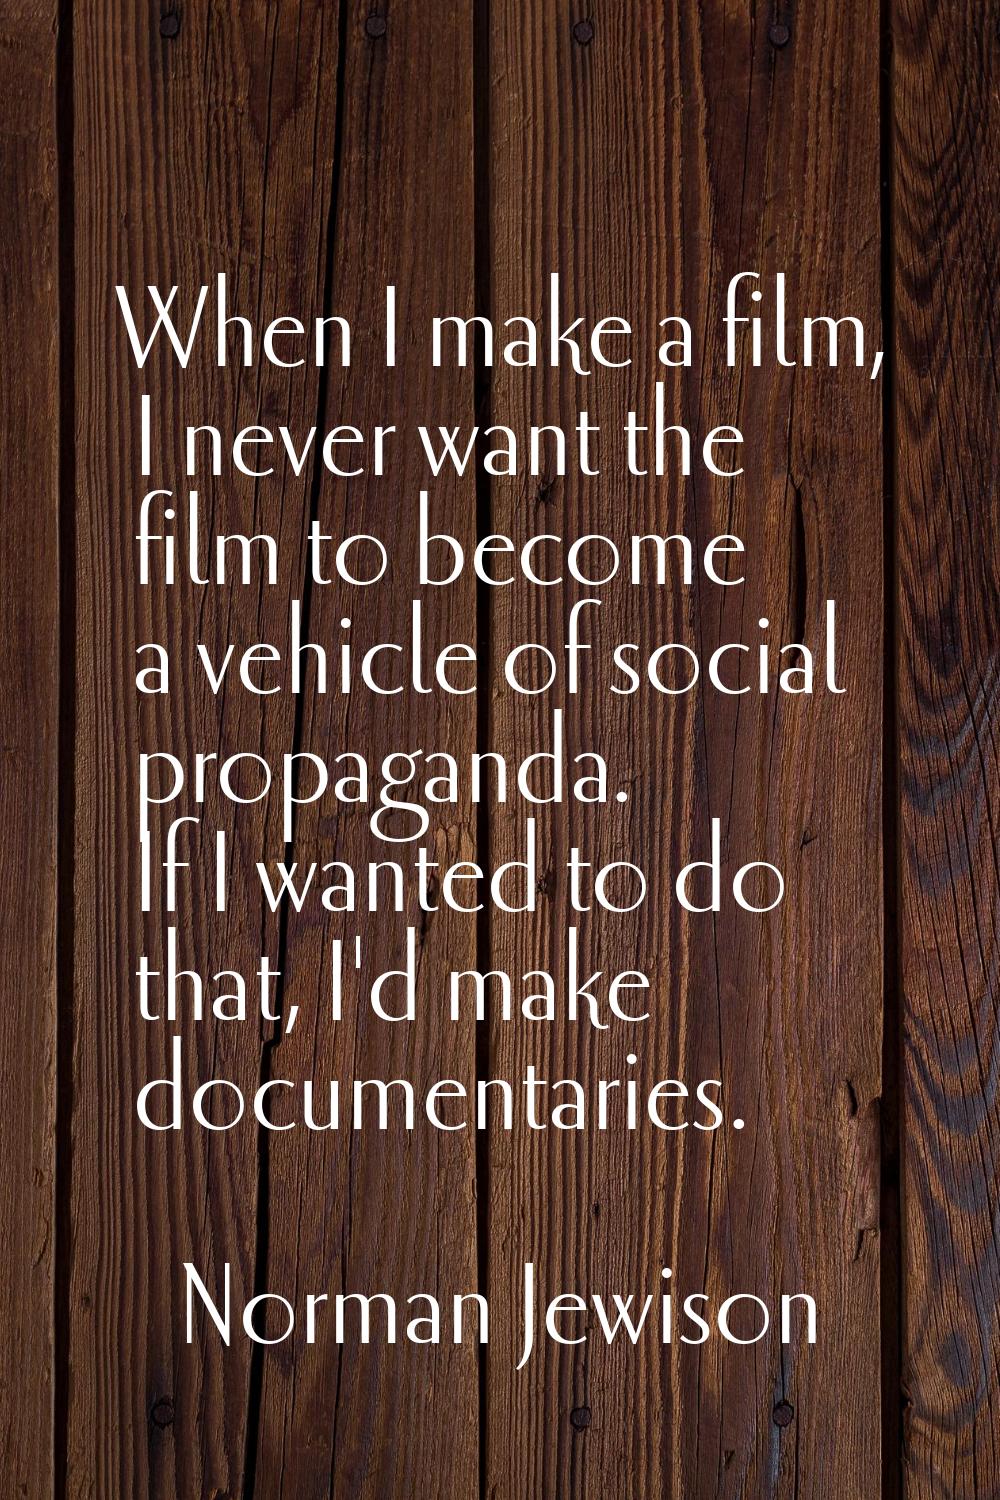 When I make a film, I never want the film to become a vehicle of social propaganda. If I wanted to 